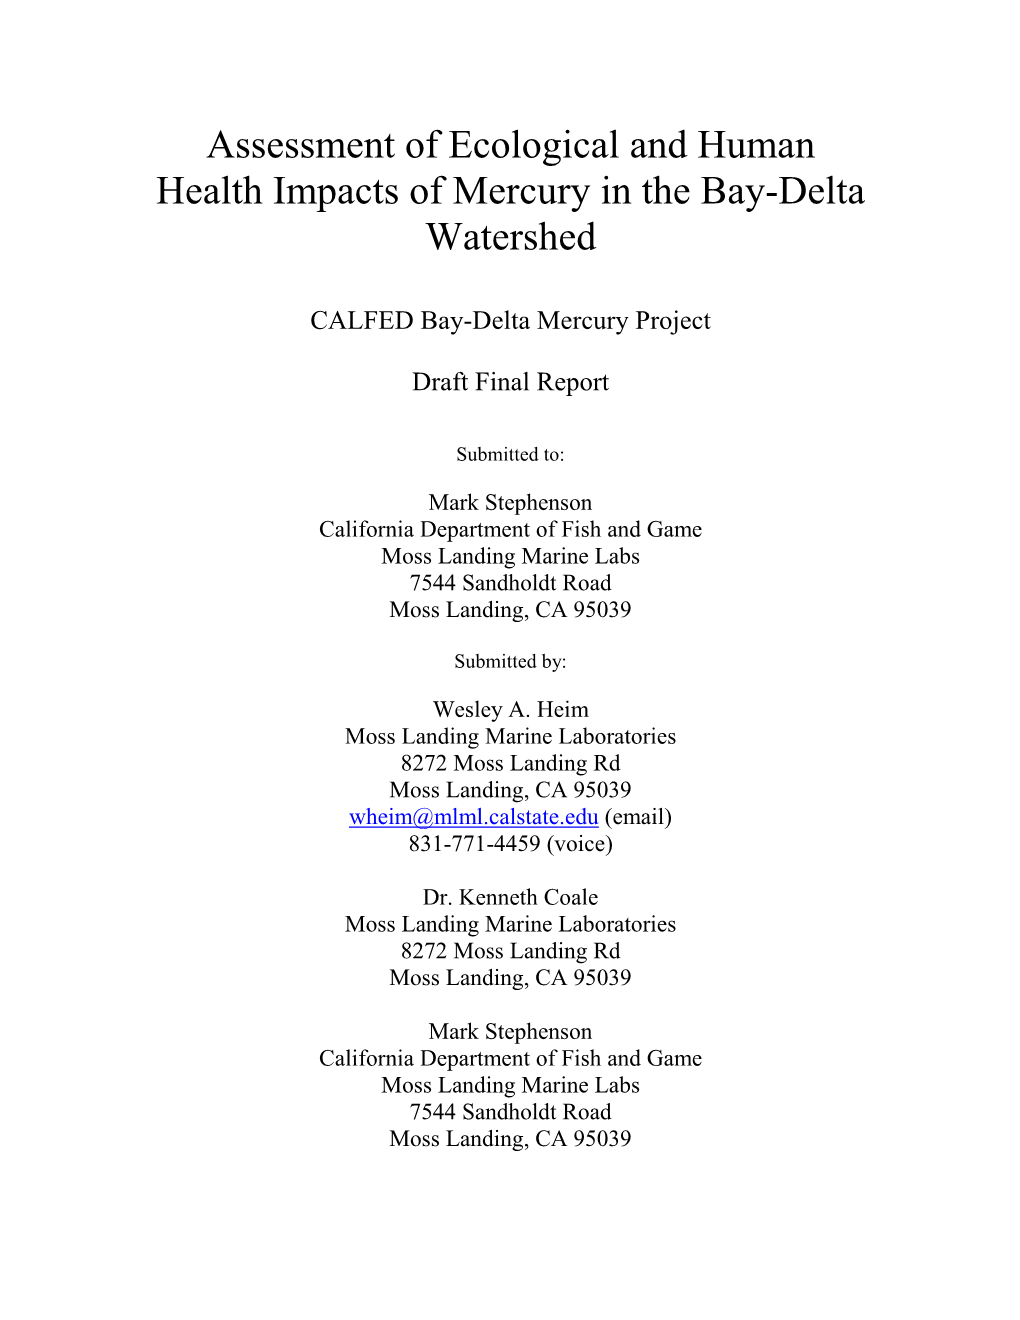 Assessment of Ecological and Human Health Impacts of Mercury in the Bay-Delta Watershed